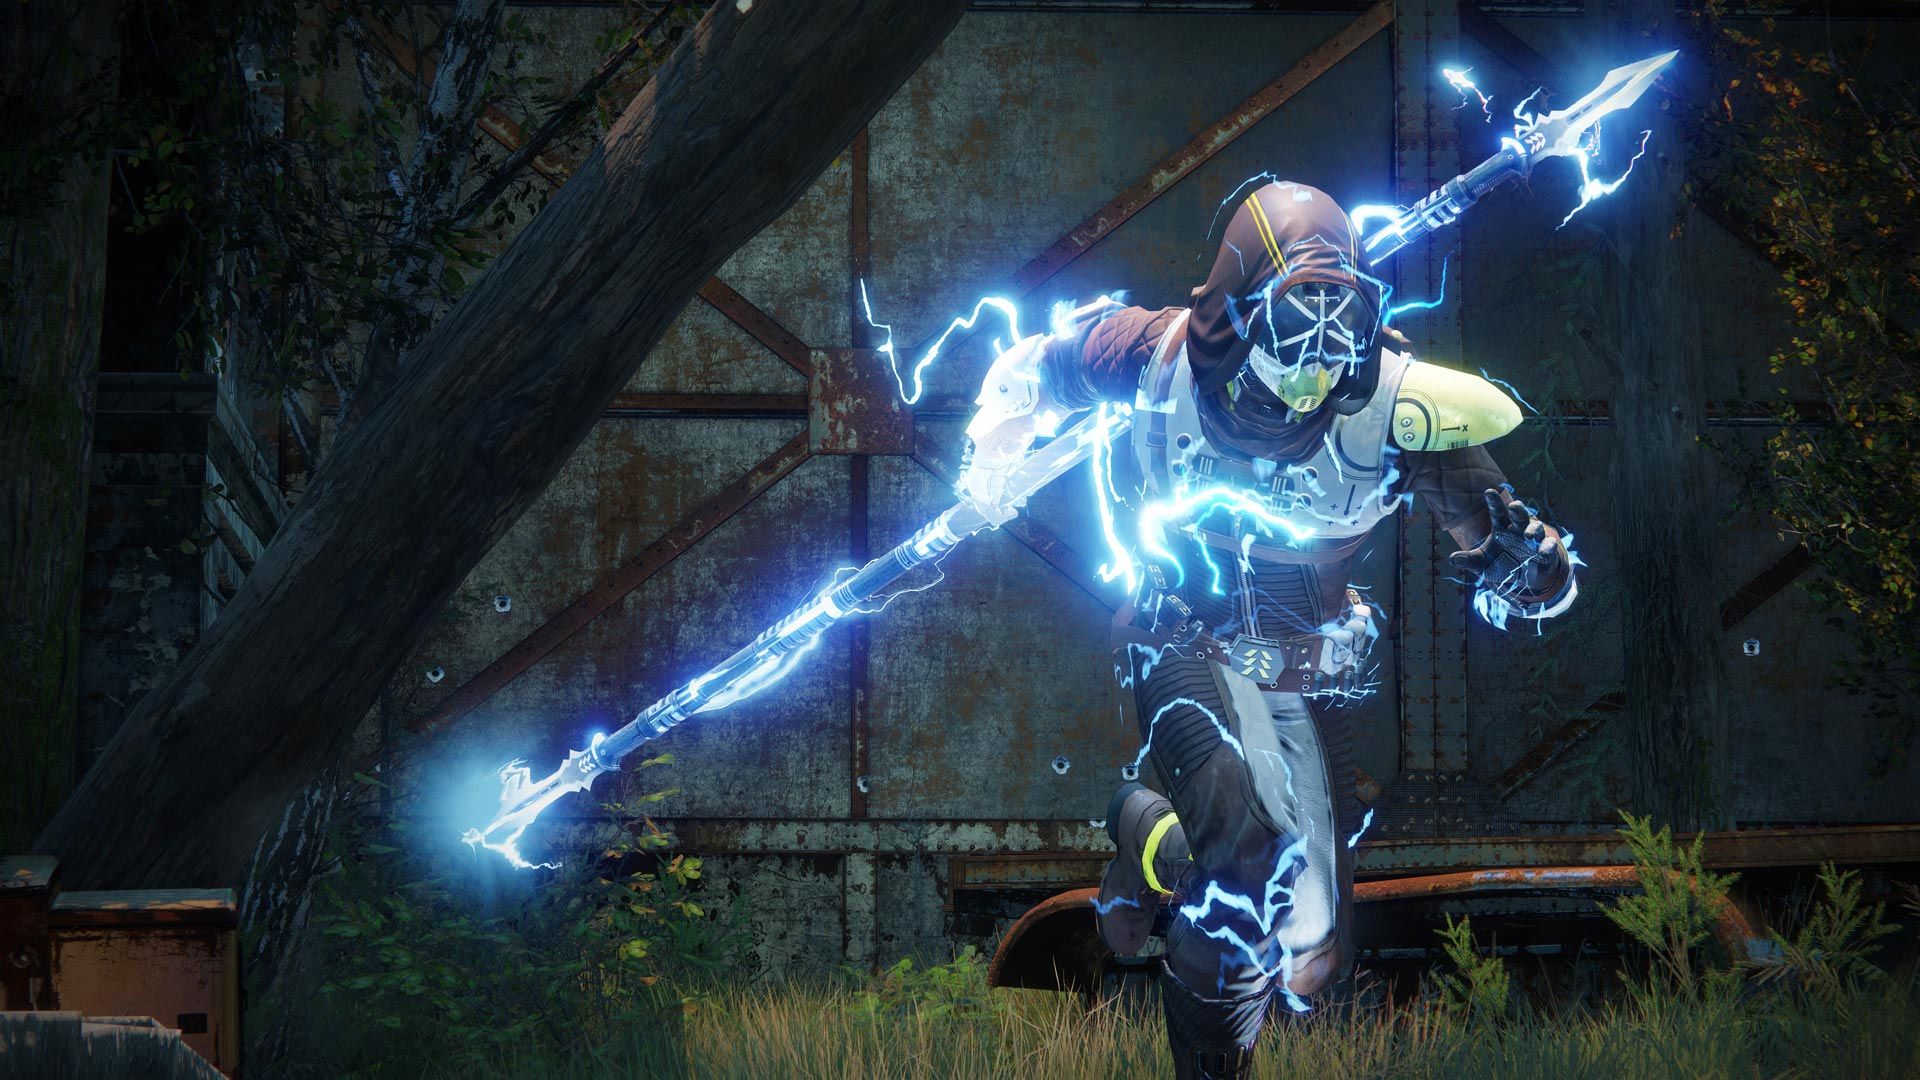 Destiny 2 classes: a Hunter striding across the battlefield with an Arc energy staff